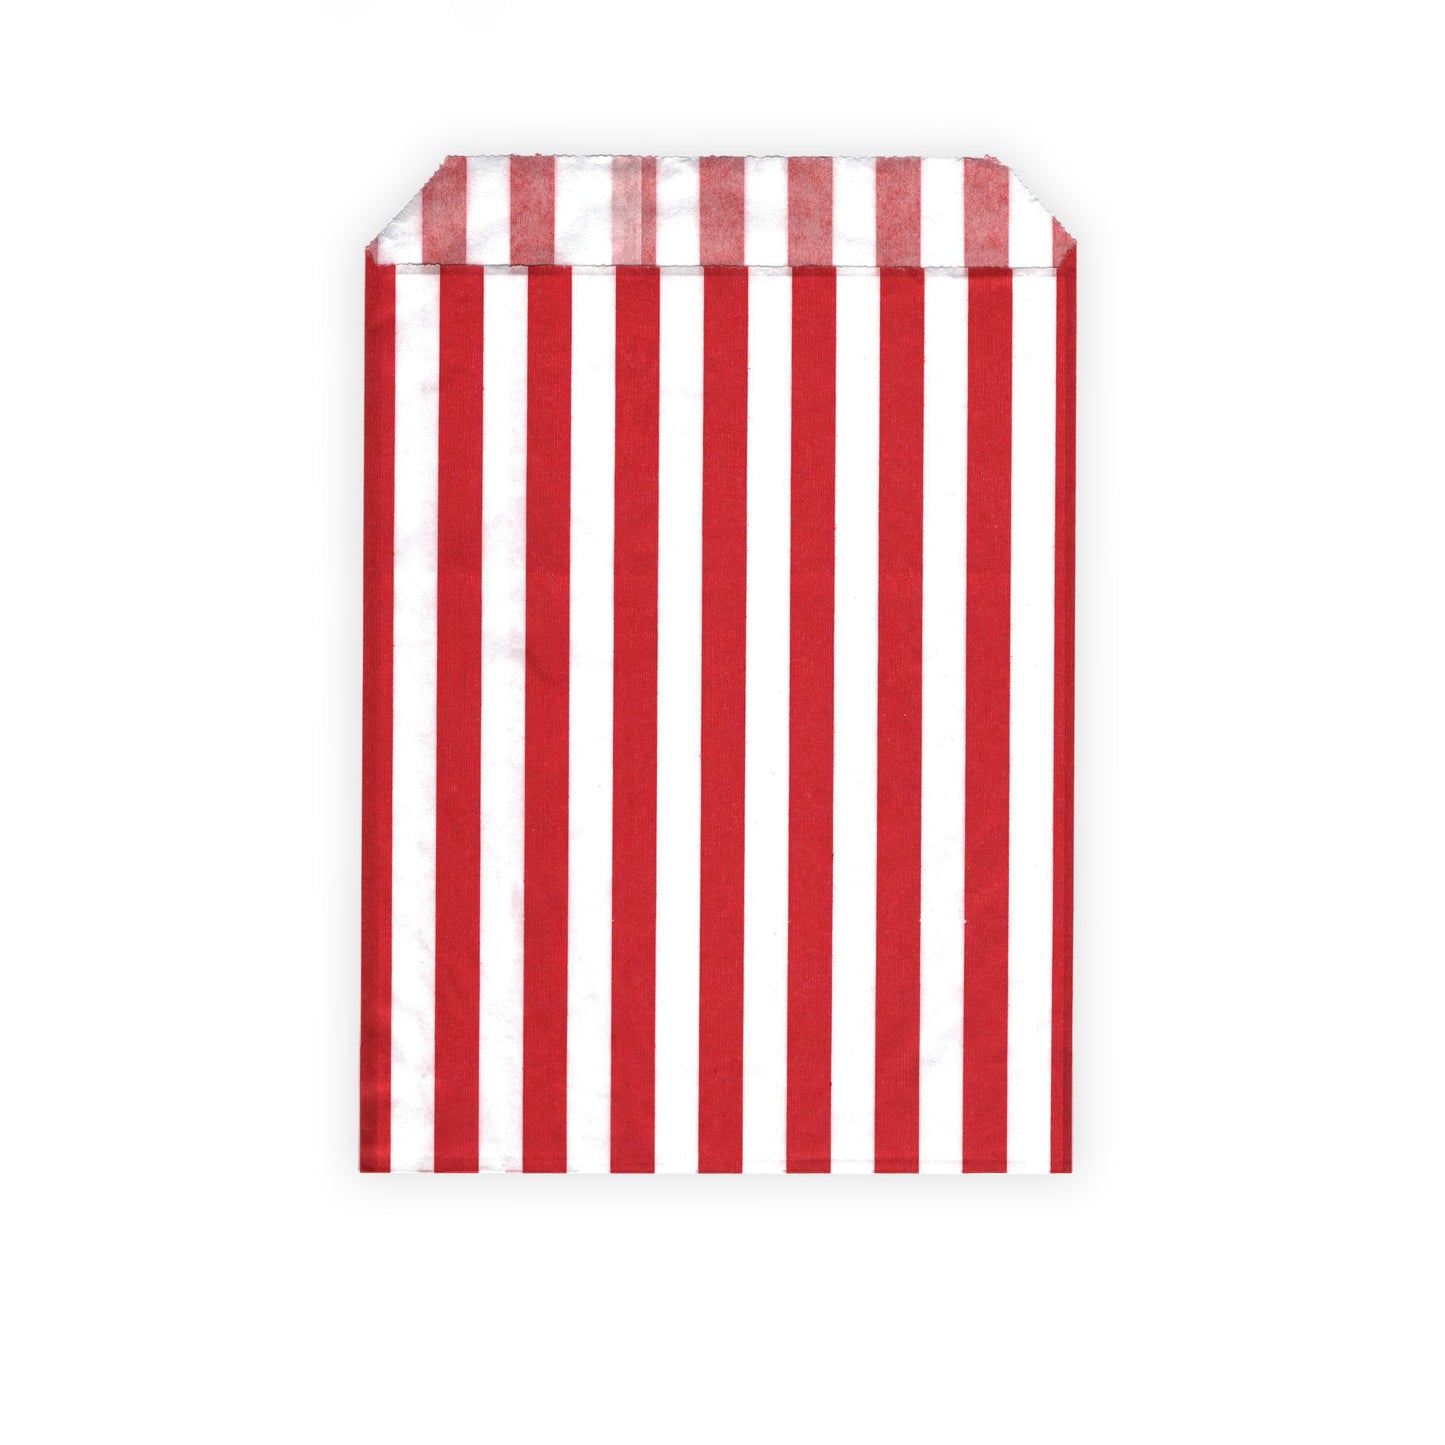 Retro Candy Bags - Red / White Stripes - 13 x 18cm by Gobrecht & Ulrich